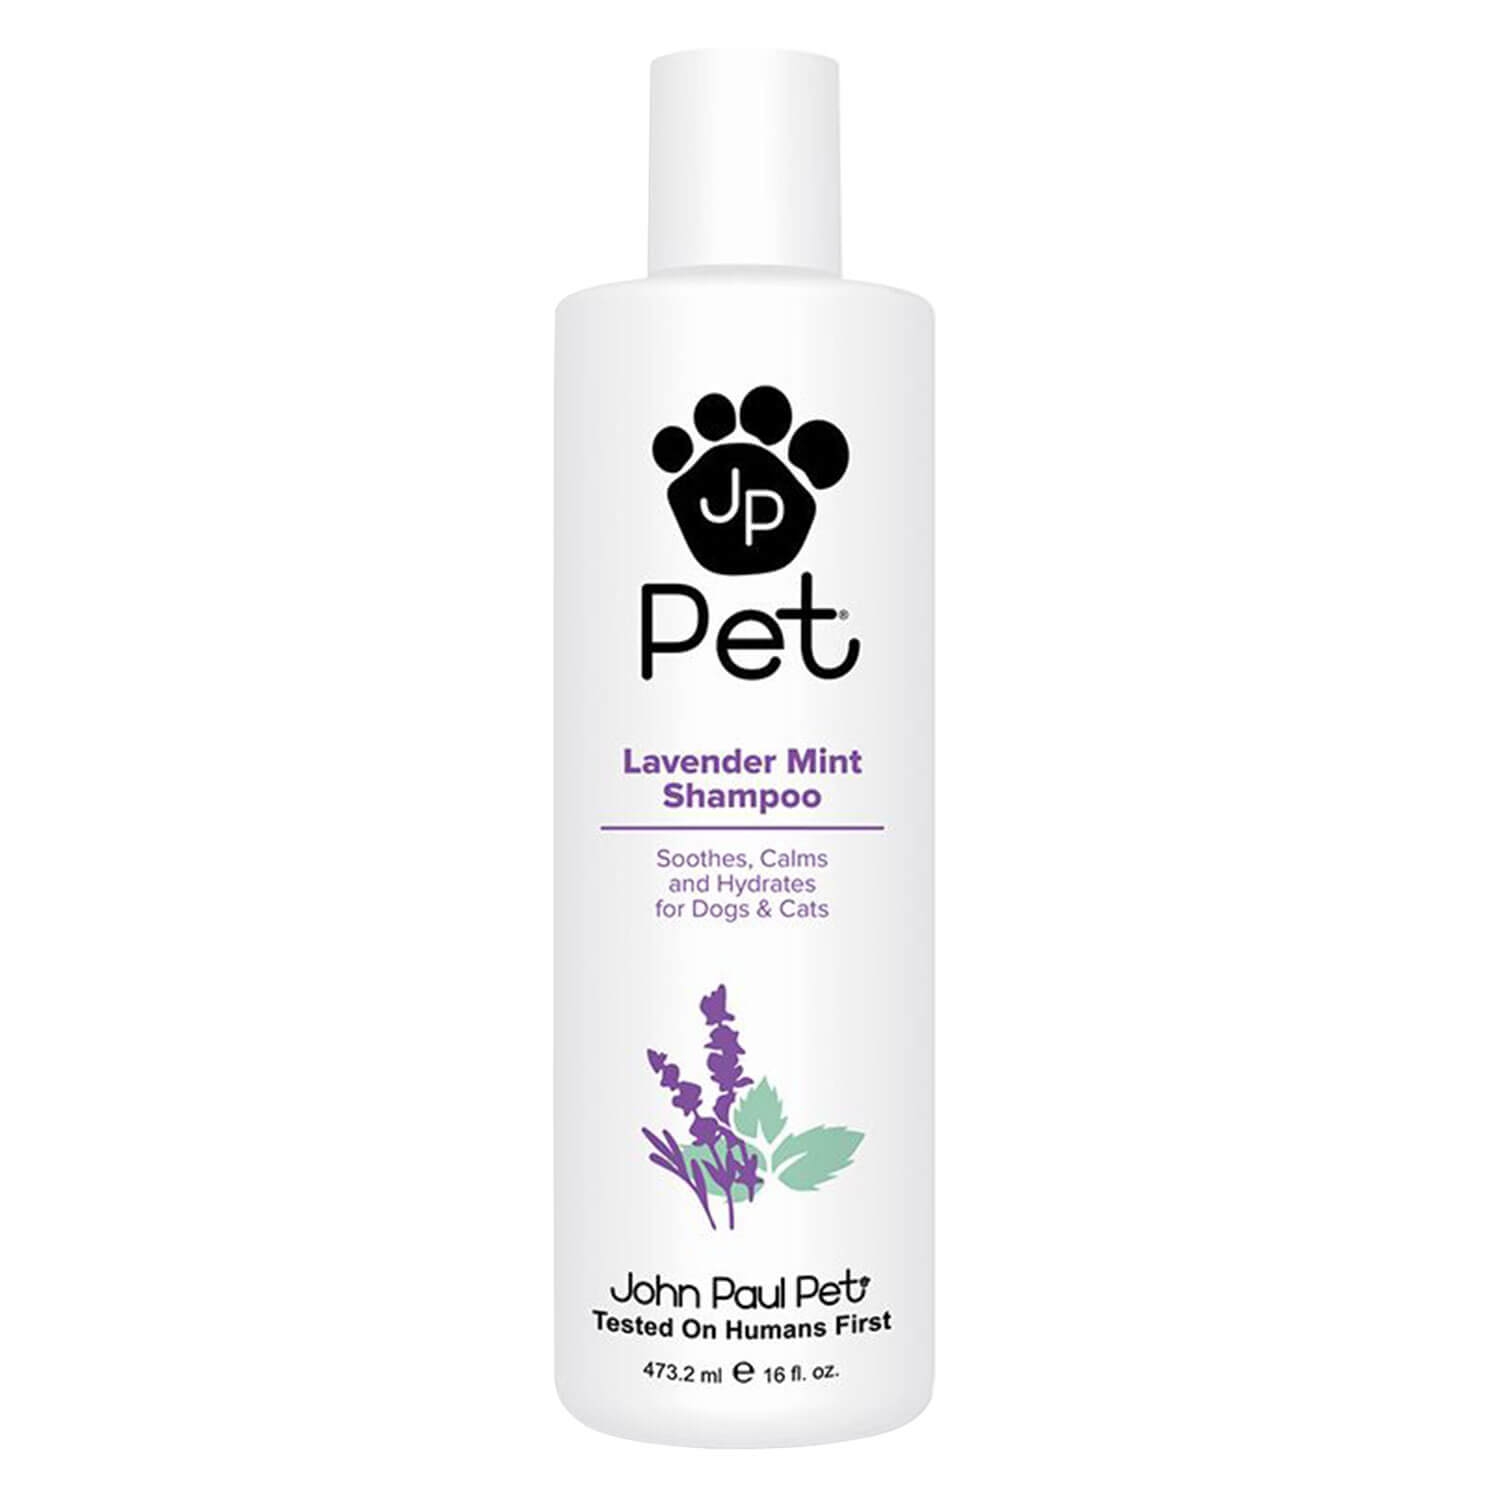 Product image from JP Pet - Lavender Mint Shampoo